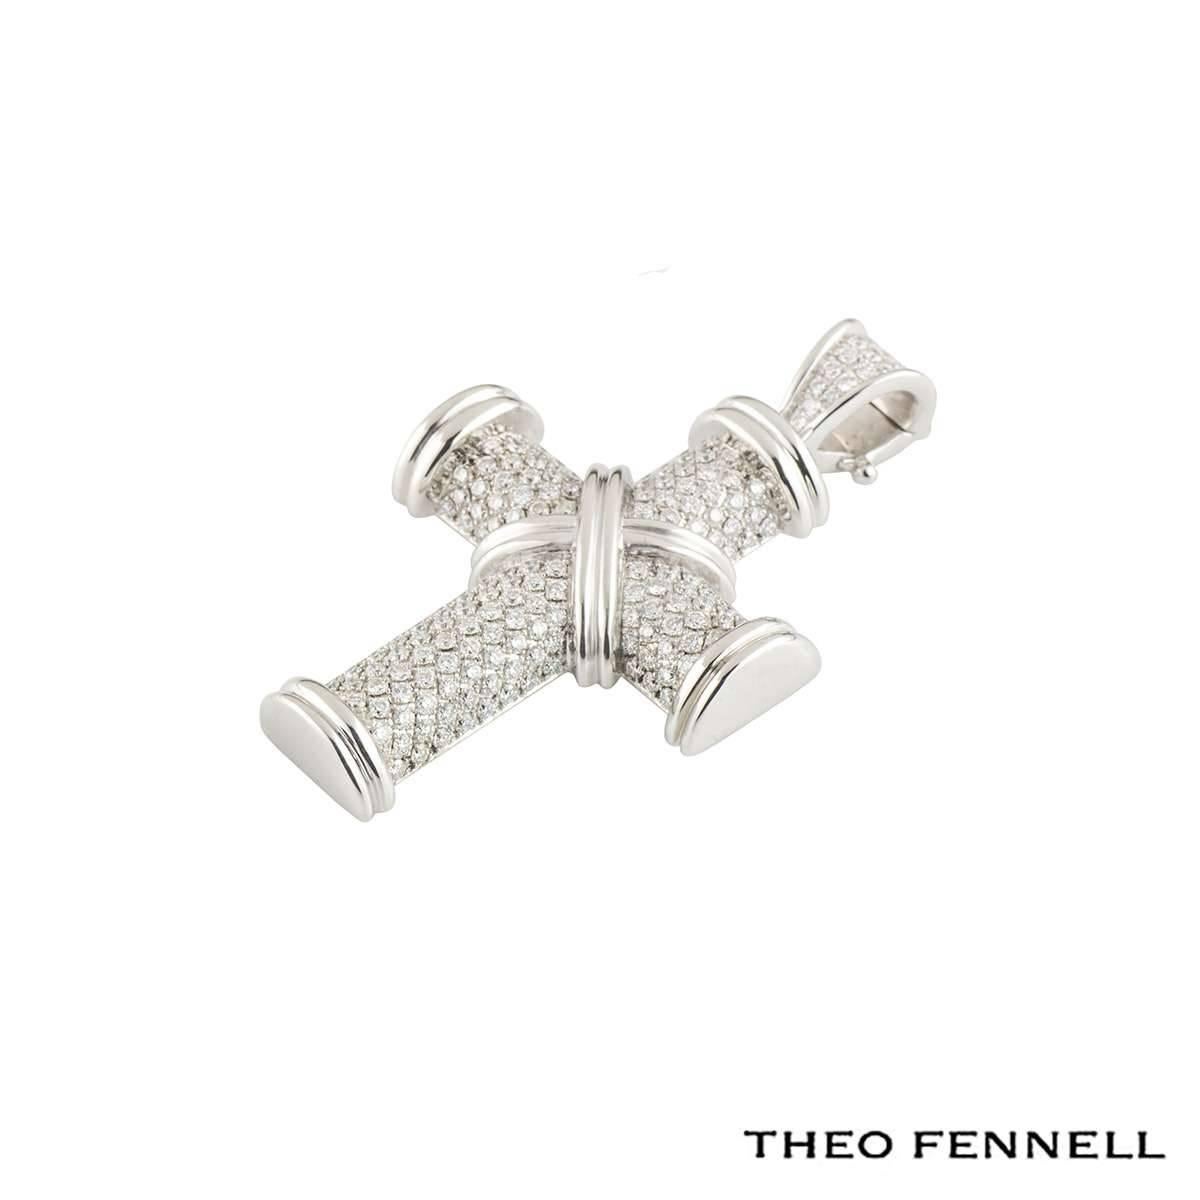 A sparkly 18k white gold Theo Fennell diamond pendant from the Crosses collection. The pendant comprises of a cross motif with 191 pave set round brilliant cut diamonds totalling approximately 1.28ct, G colour and VS clarity. The pendant measures